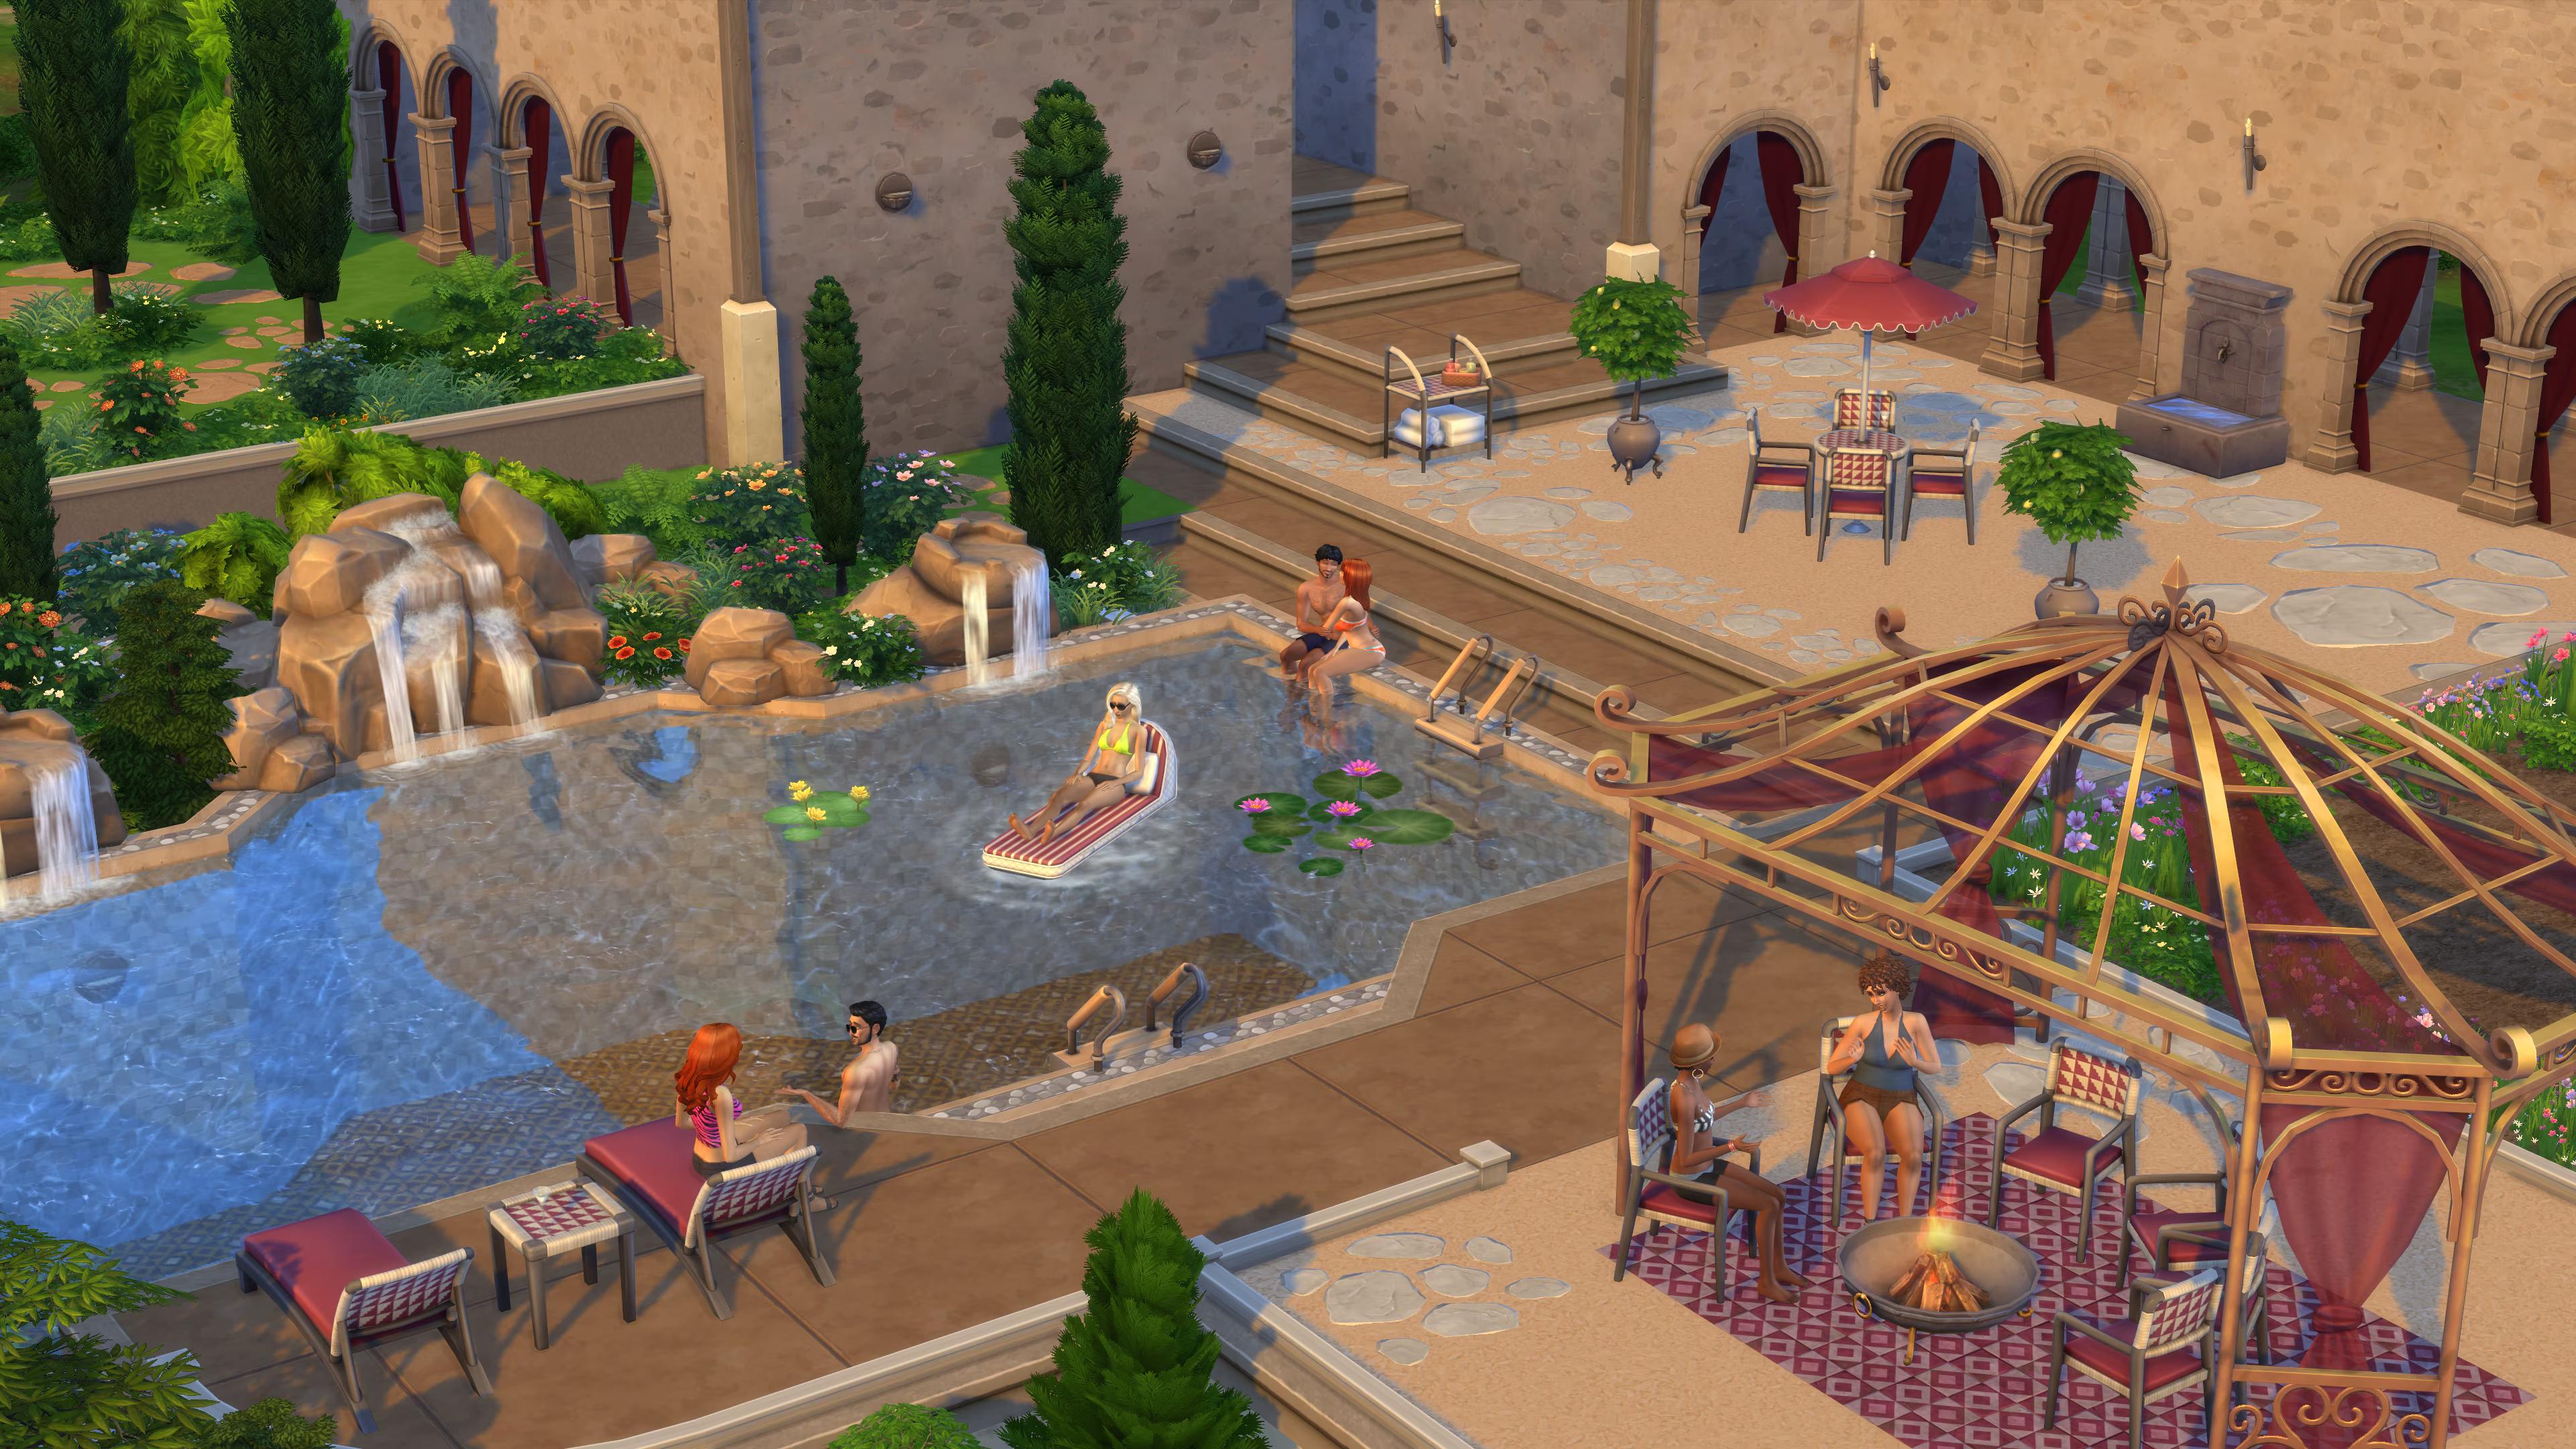 An assortment of beautiful poolside props in The Sims 4, available in the upcoming Rivieria Retreat cosmetics kit with new furniture and ssets.